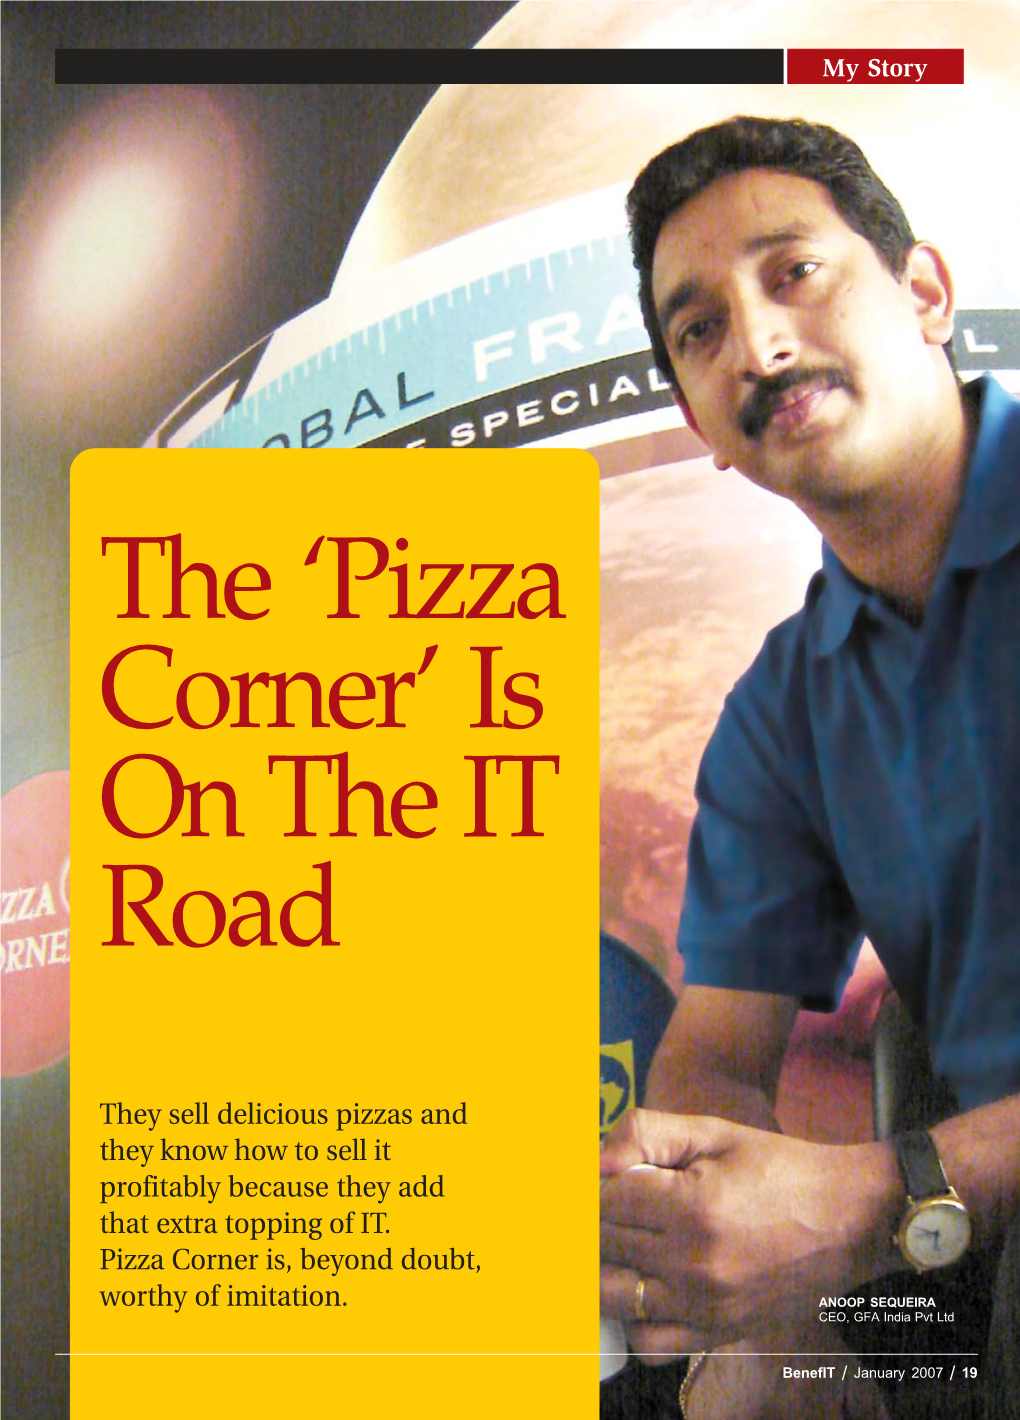 The 'Pizza Corner' Is on the IT Road